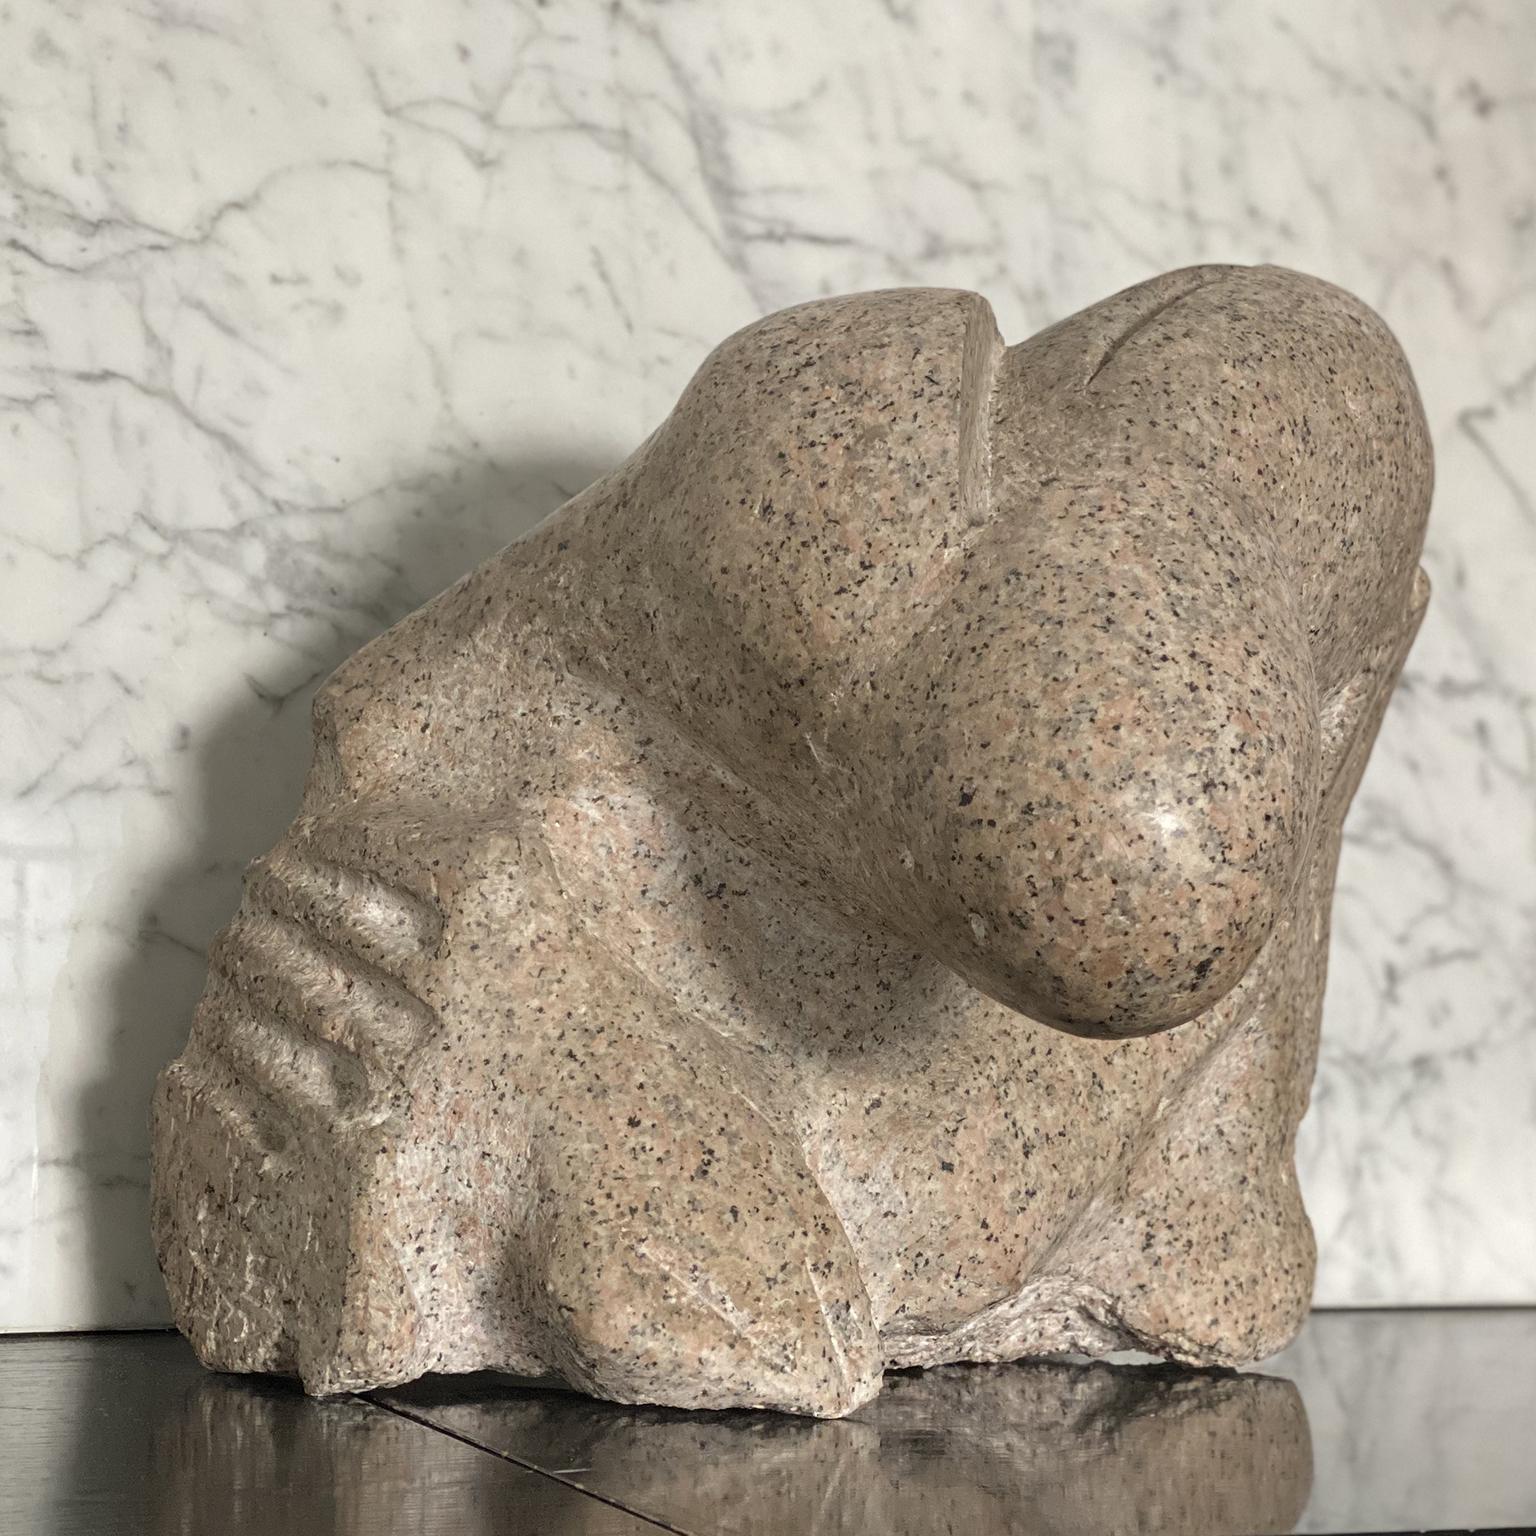 This is a very rare and refined sculpture by Italian artist Aldo Flecchia, created in the 1970s from a block of solid pink granite. It is a very plastic abstract composition of smooth and edgy shapes. It is extremely materic, and the lightplay on